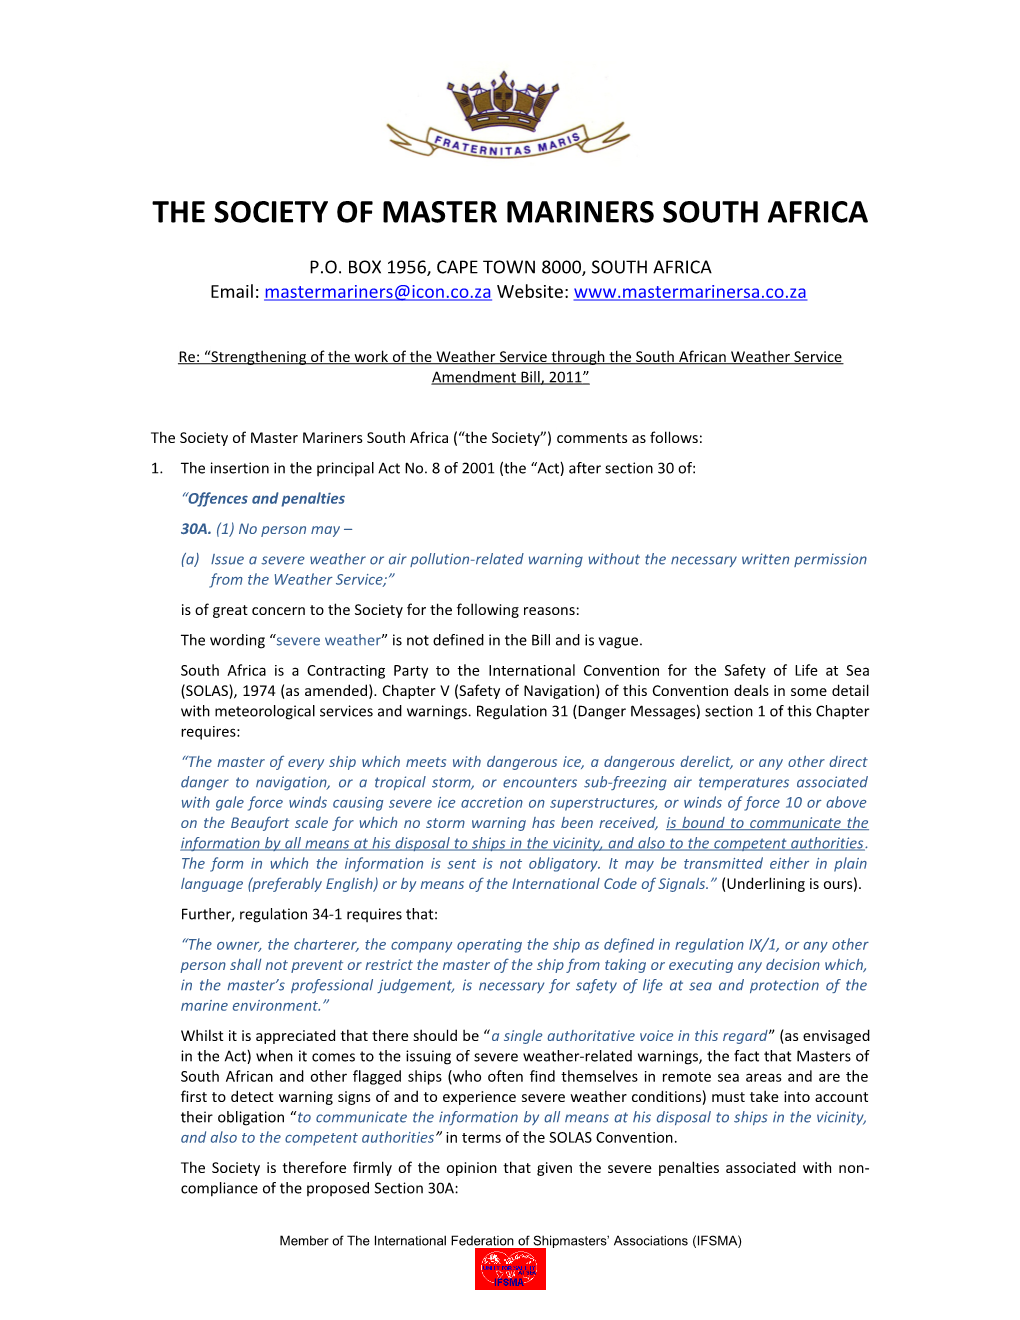 The Society of Master Mariners South Africa